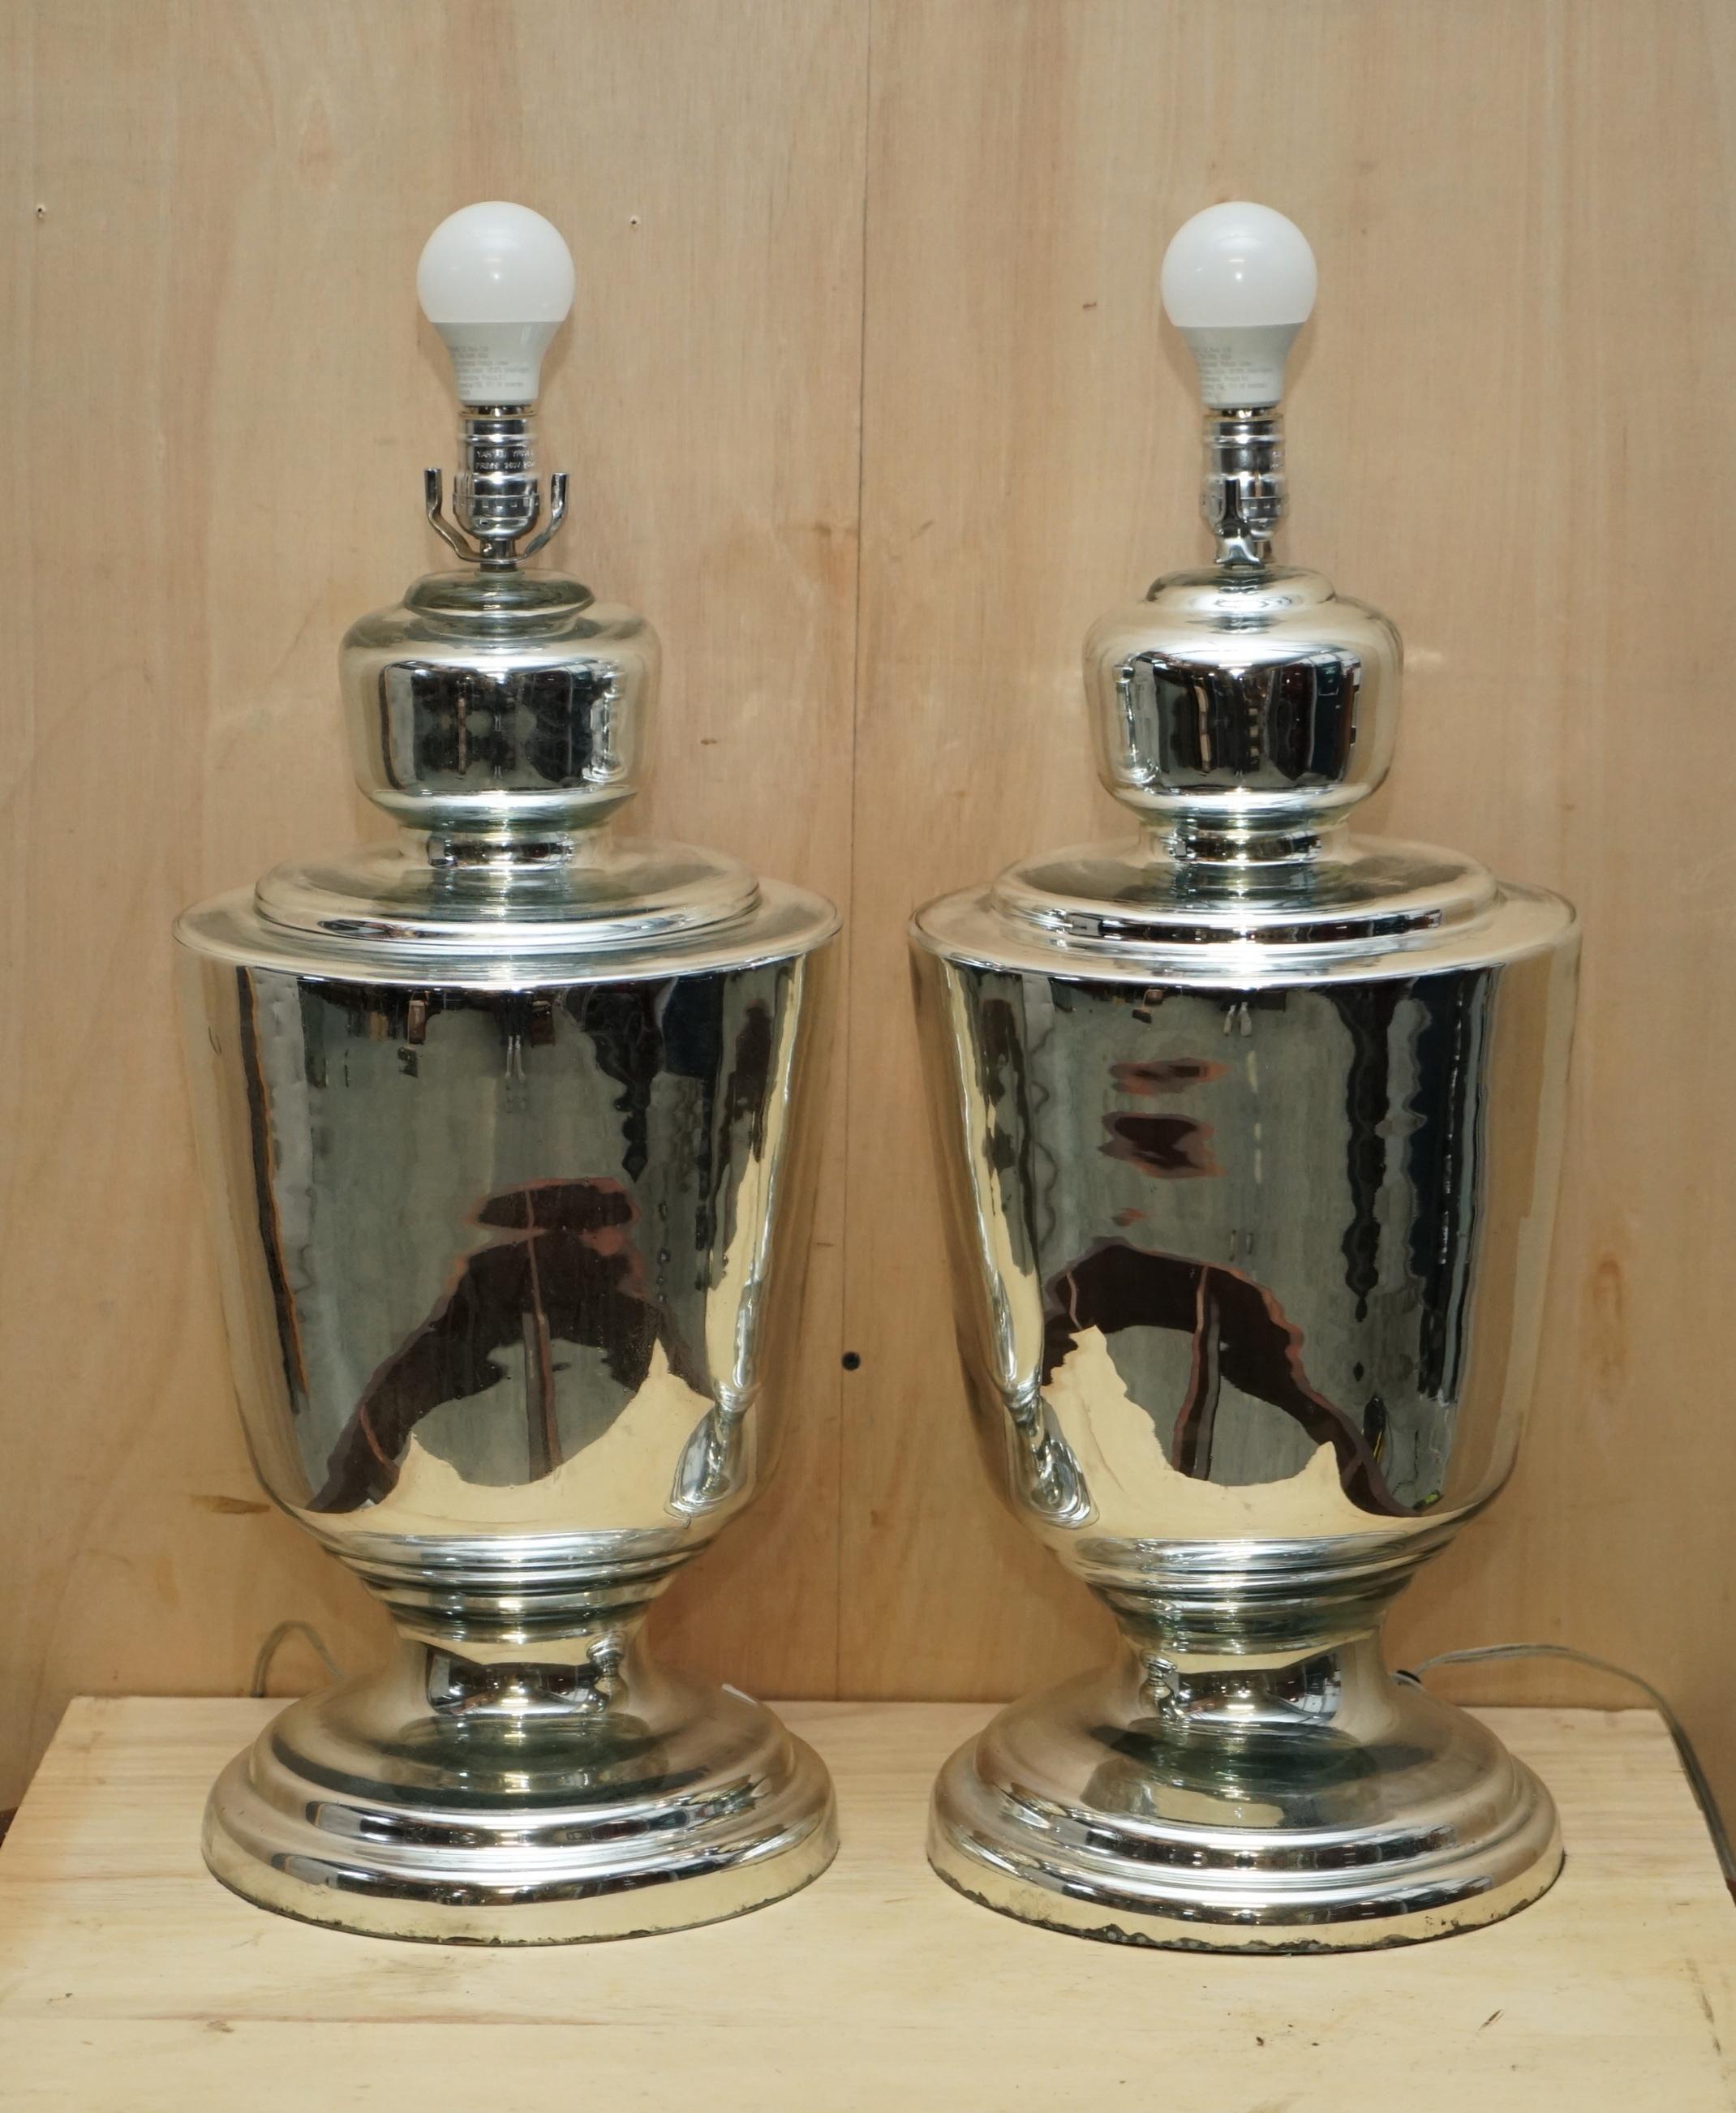 We are delighted to offer for sale this stunning pair of vintage mirrored foxed glass large urn table lamps

These lamps came from a very fine antiques dealer in Belgium, he has a client that purchases antique Italian lighting to import to the US